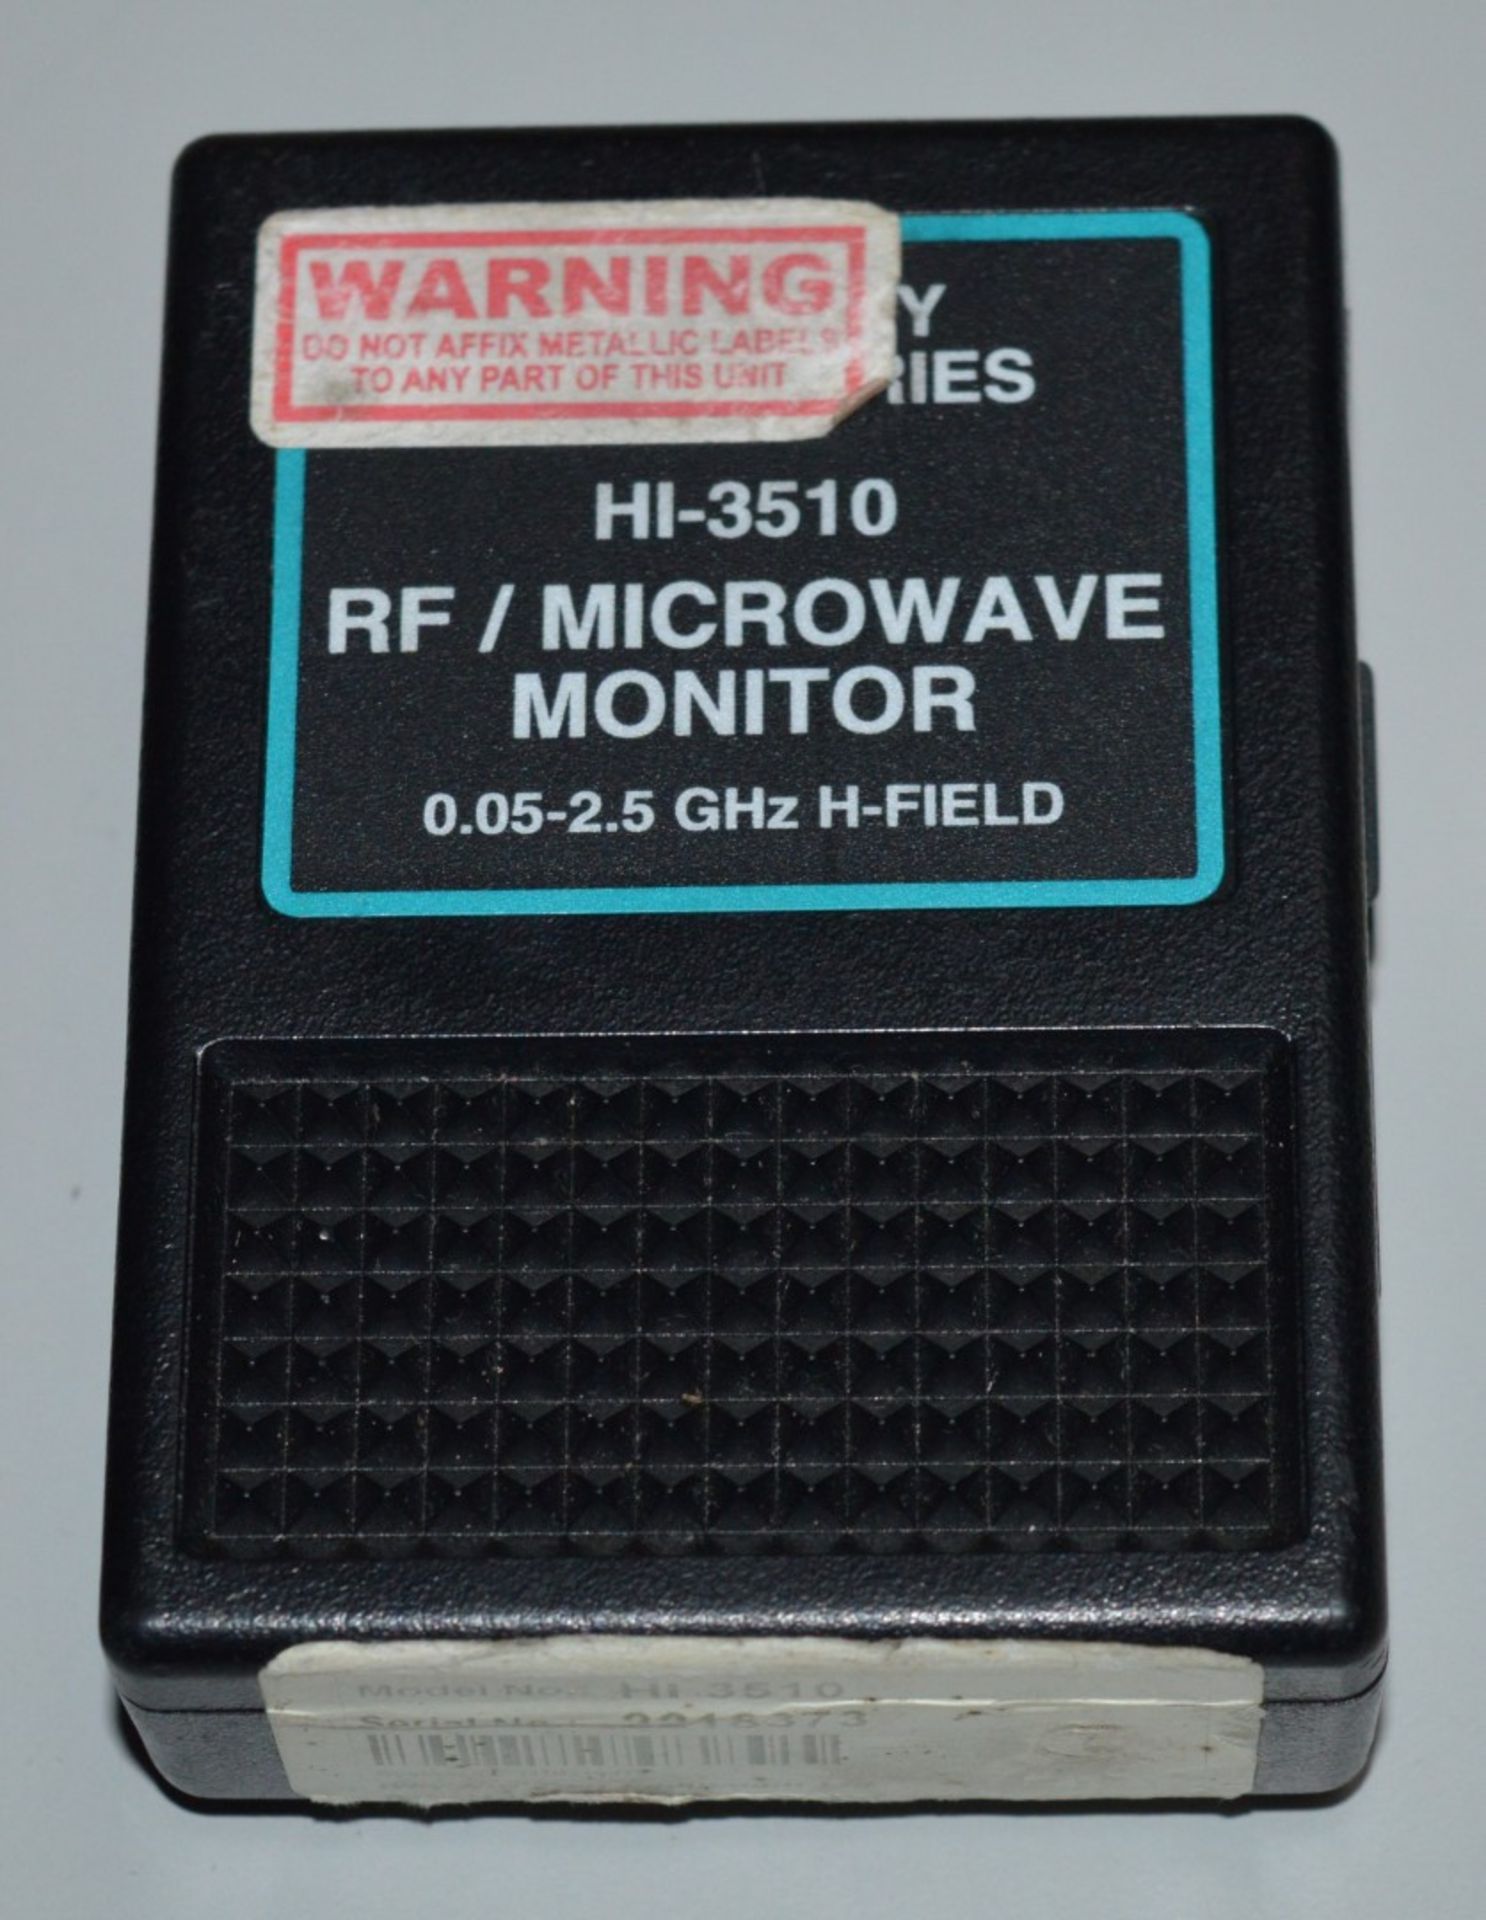 1 x Holaday Industries HI-3510 RF Microwave Monitor - 0.05 - 2.5ghz H-Field - Small Pocket Sized - Image 2 of 3